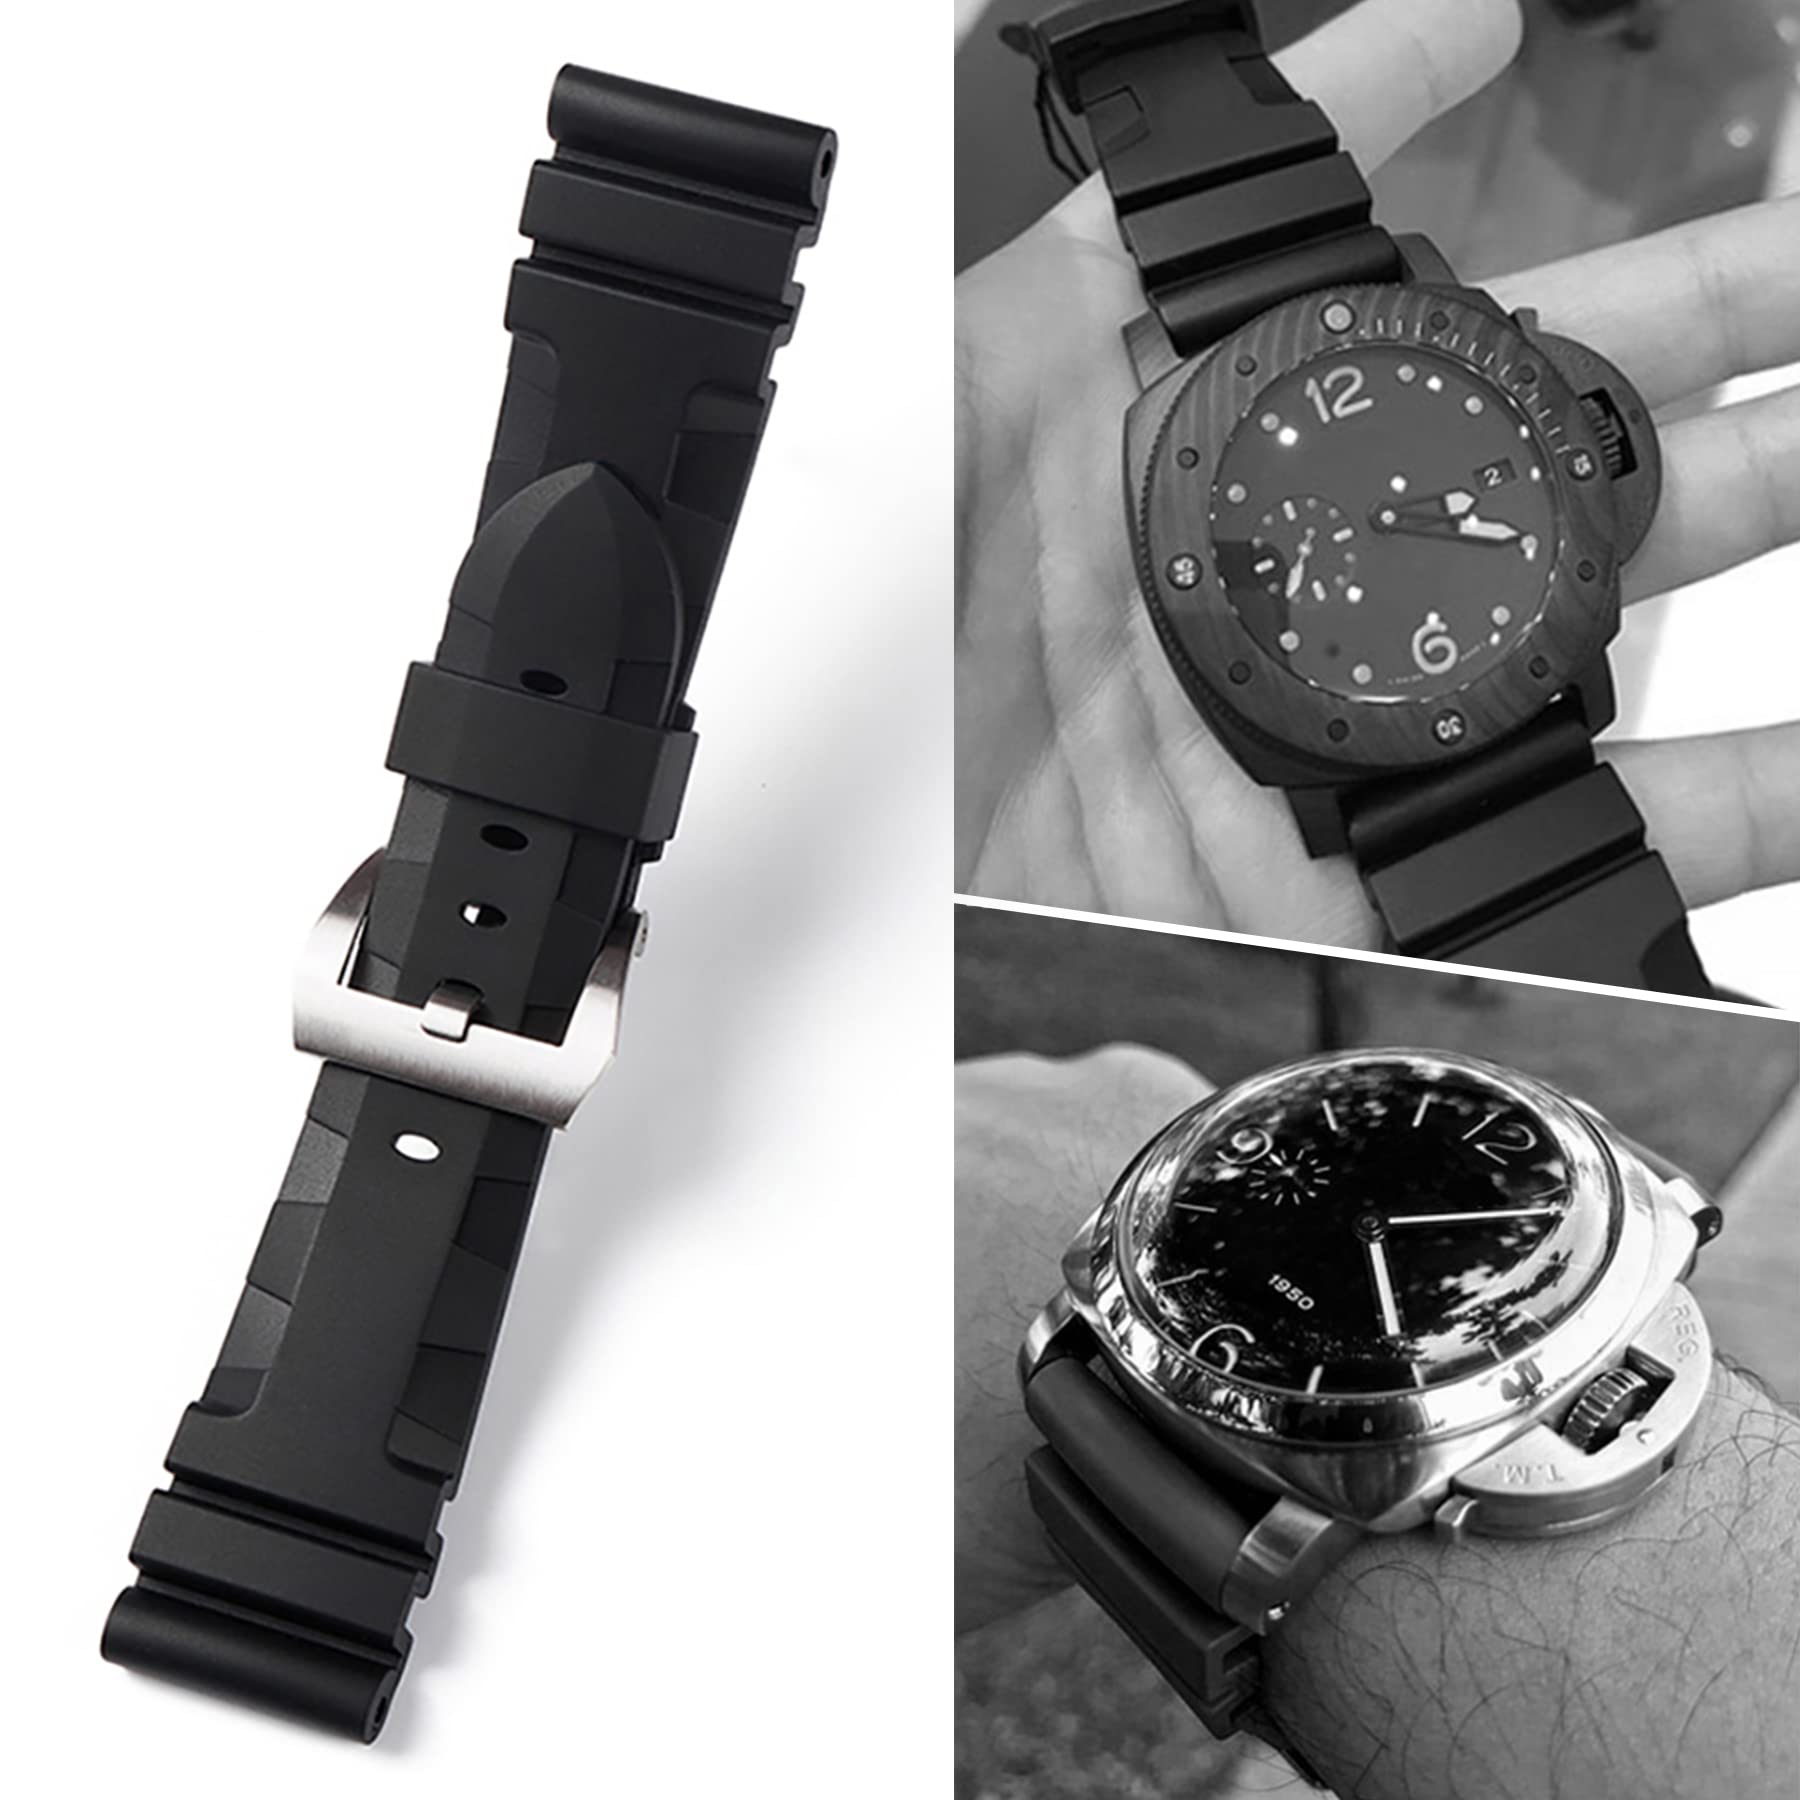 Men's Military Strong Rubber Watch Band Soft Silicone Replacement Watch Strap with Stainless Steel Wide Buckle Universal Strap Waterproof Sport Black